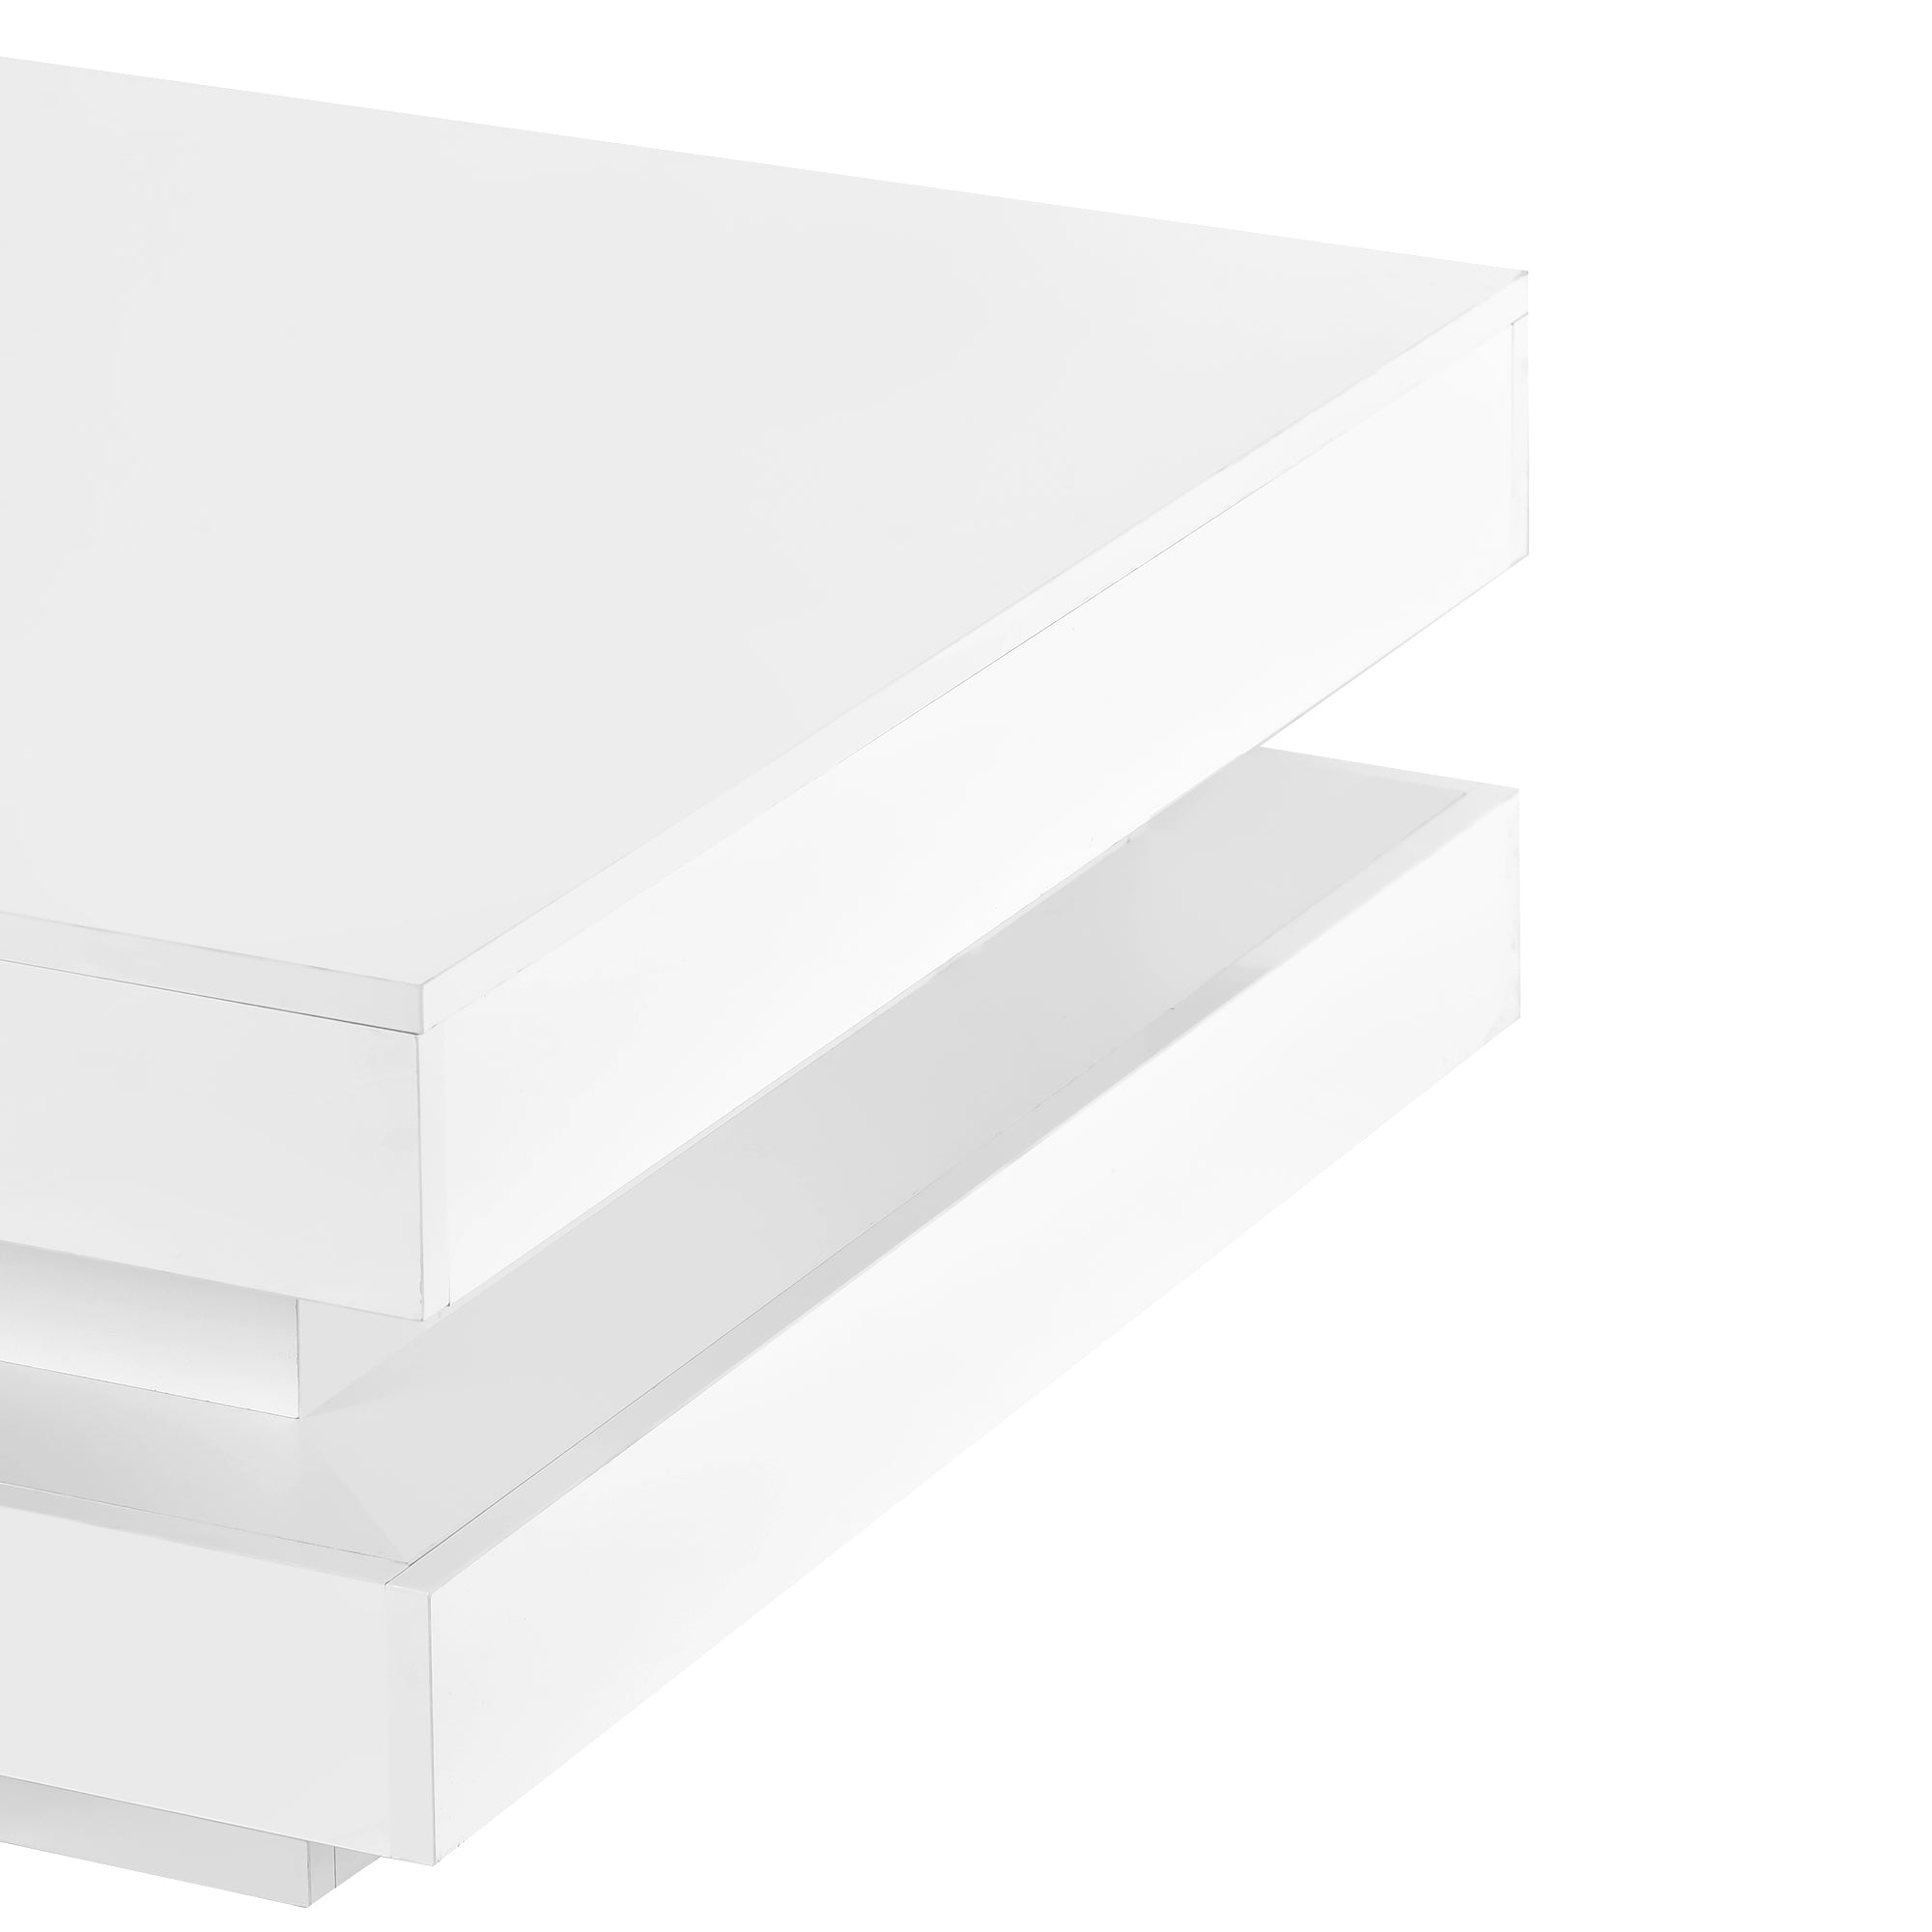 31.5" X 31.5" White High Gloss Coffee Table with LED Light